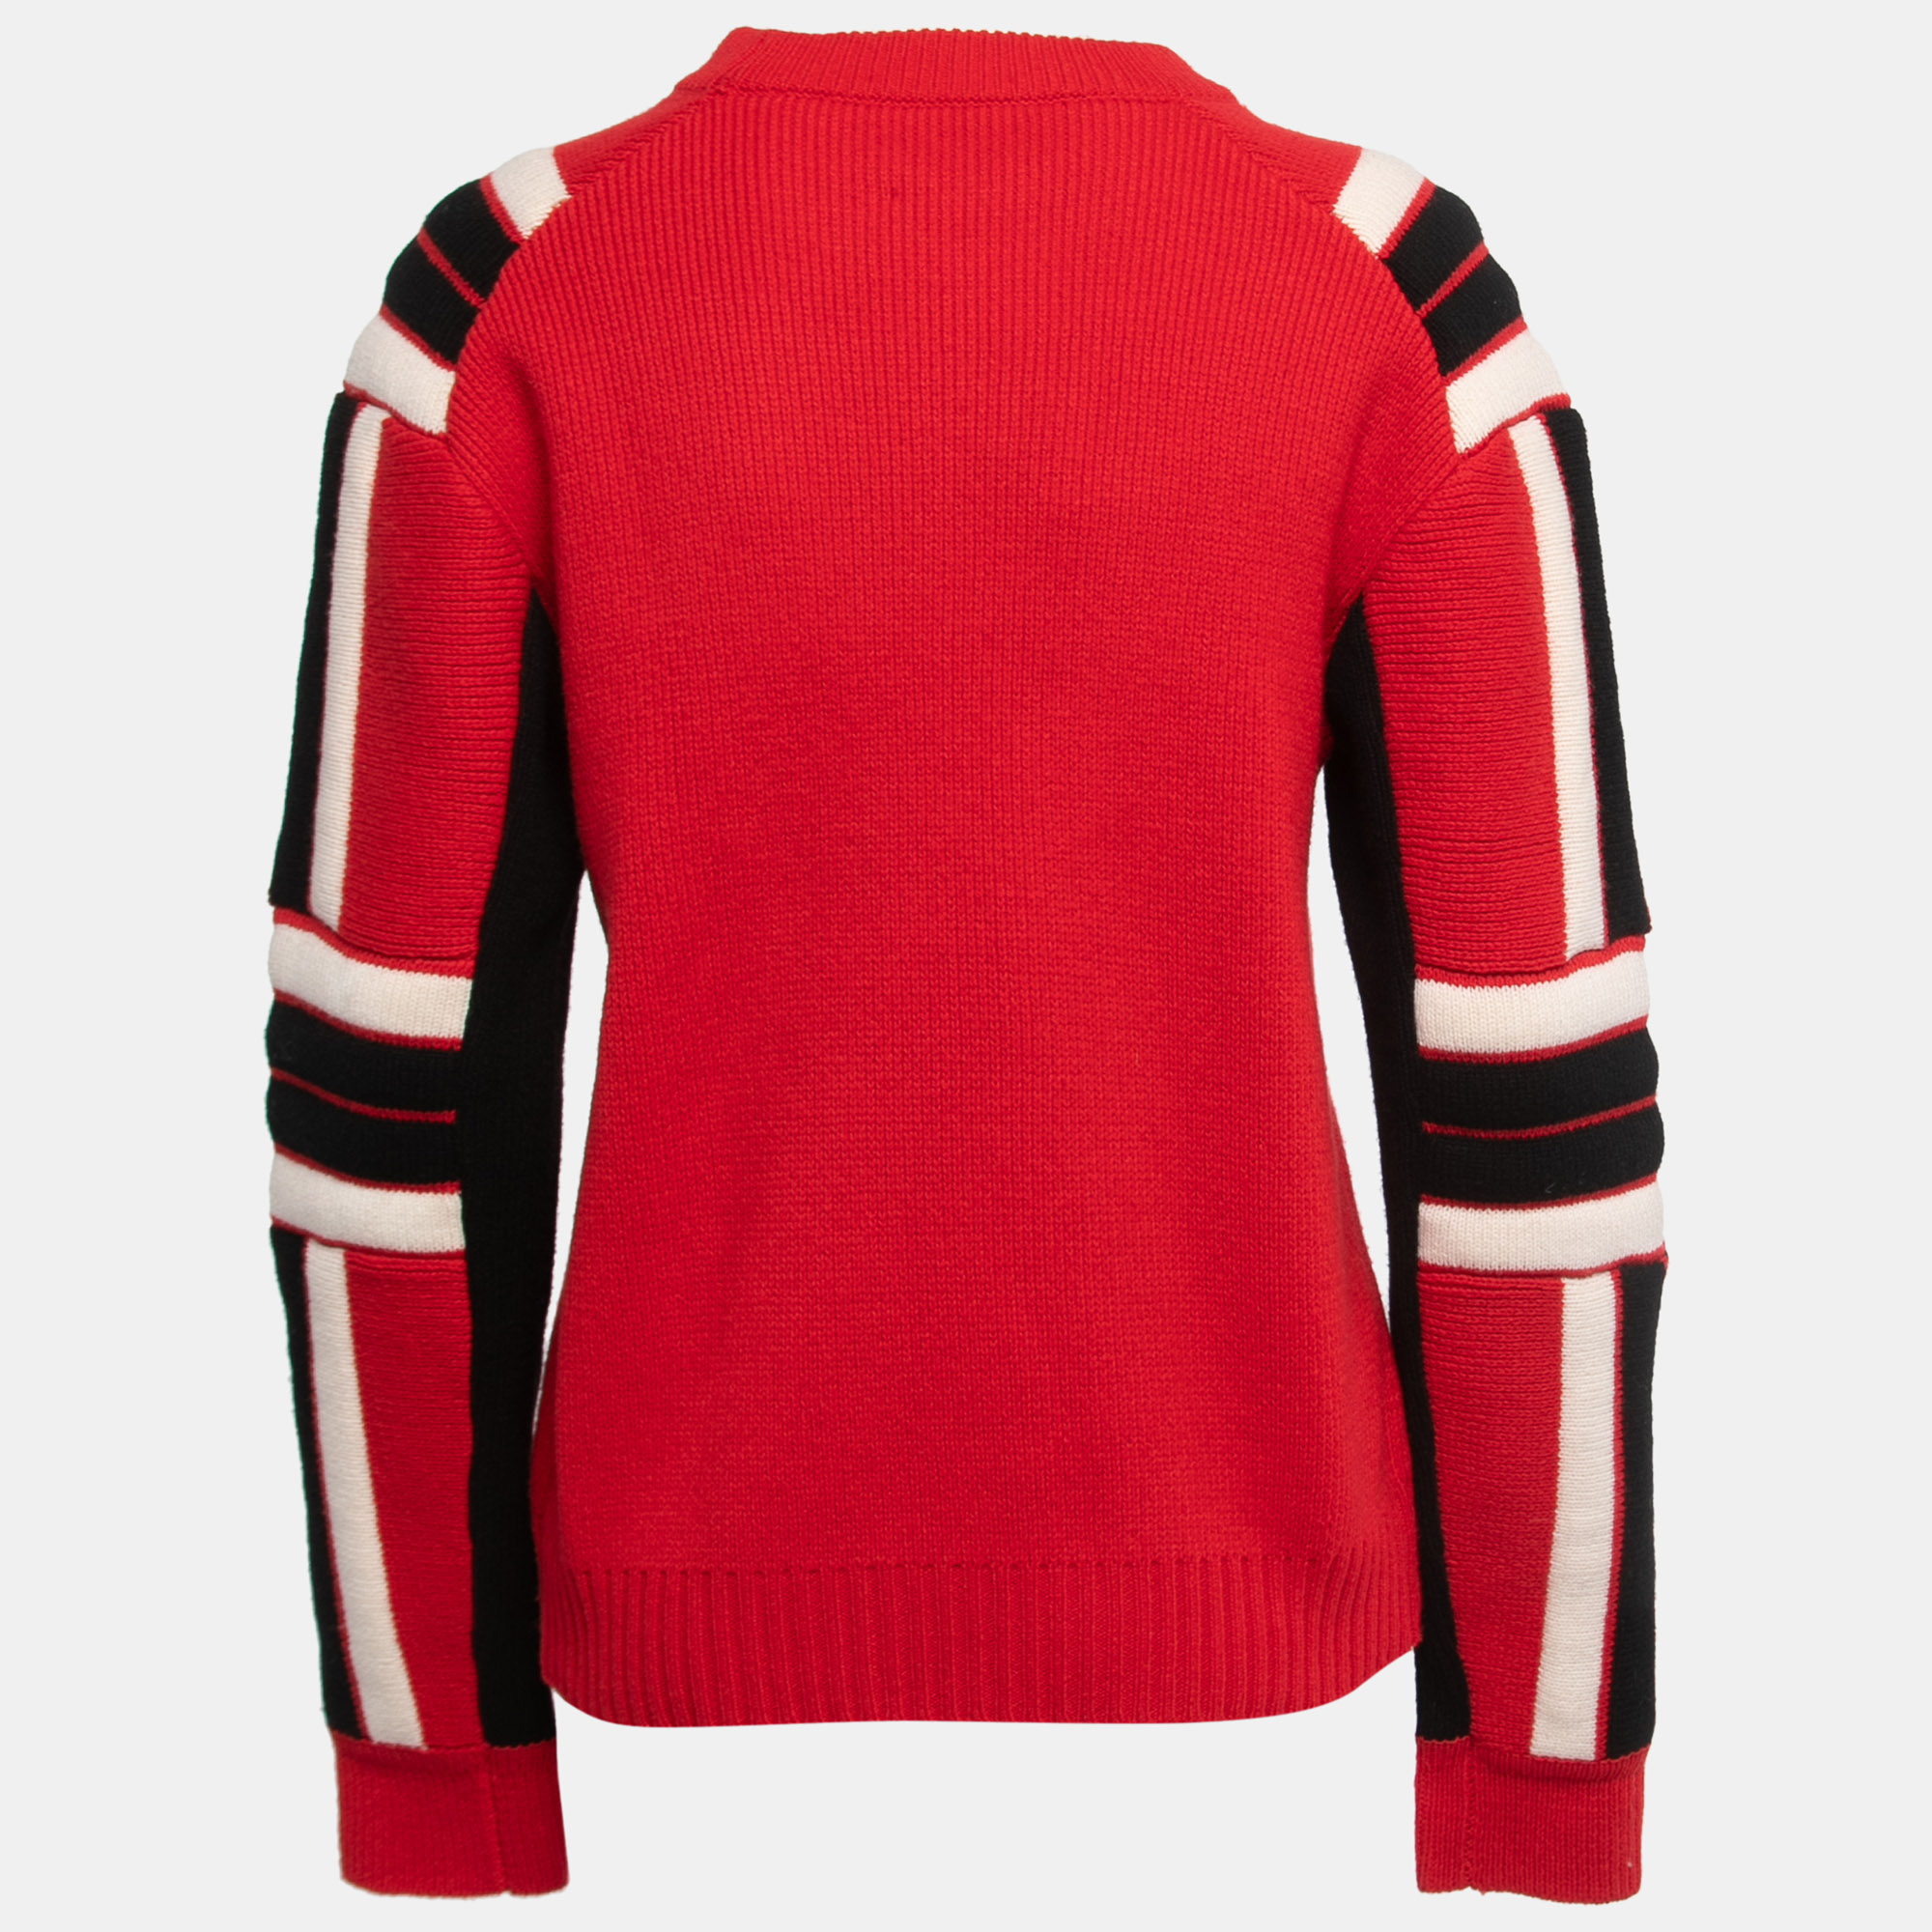 

Zadig & Voltaire Red Patterned Wool Knit Crew Neck Sweater